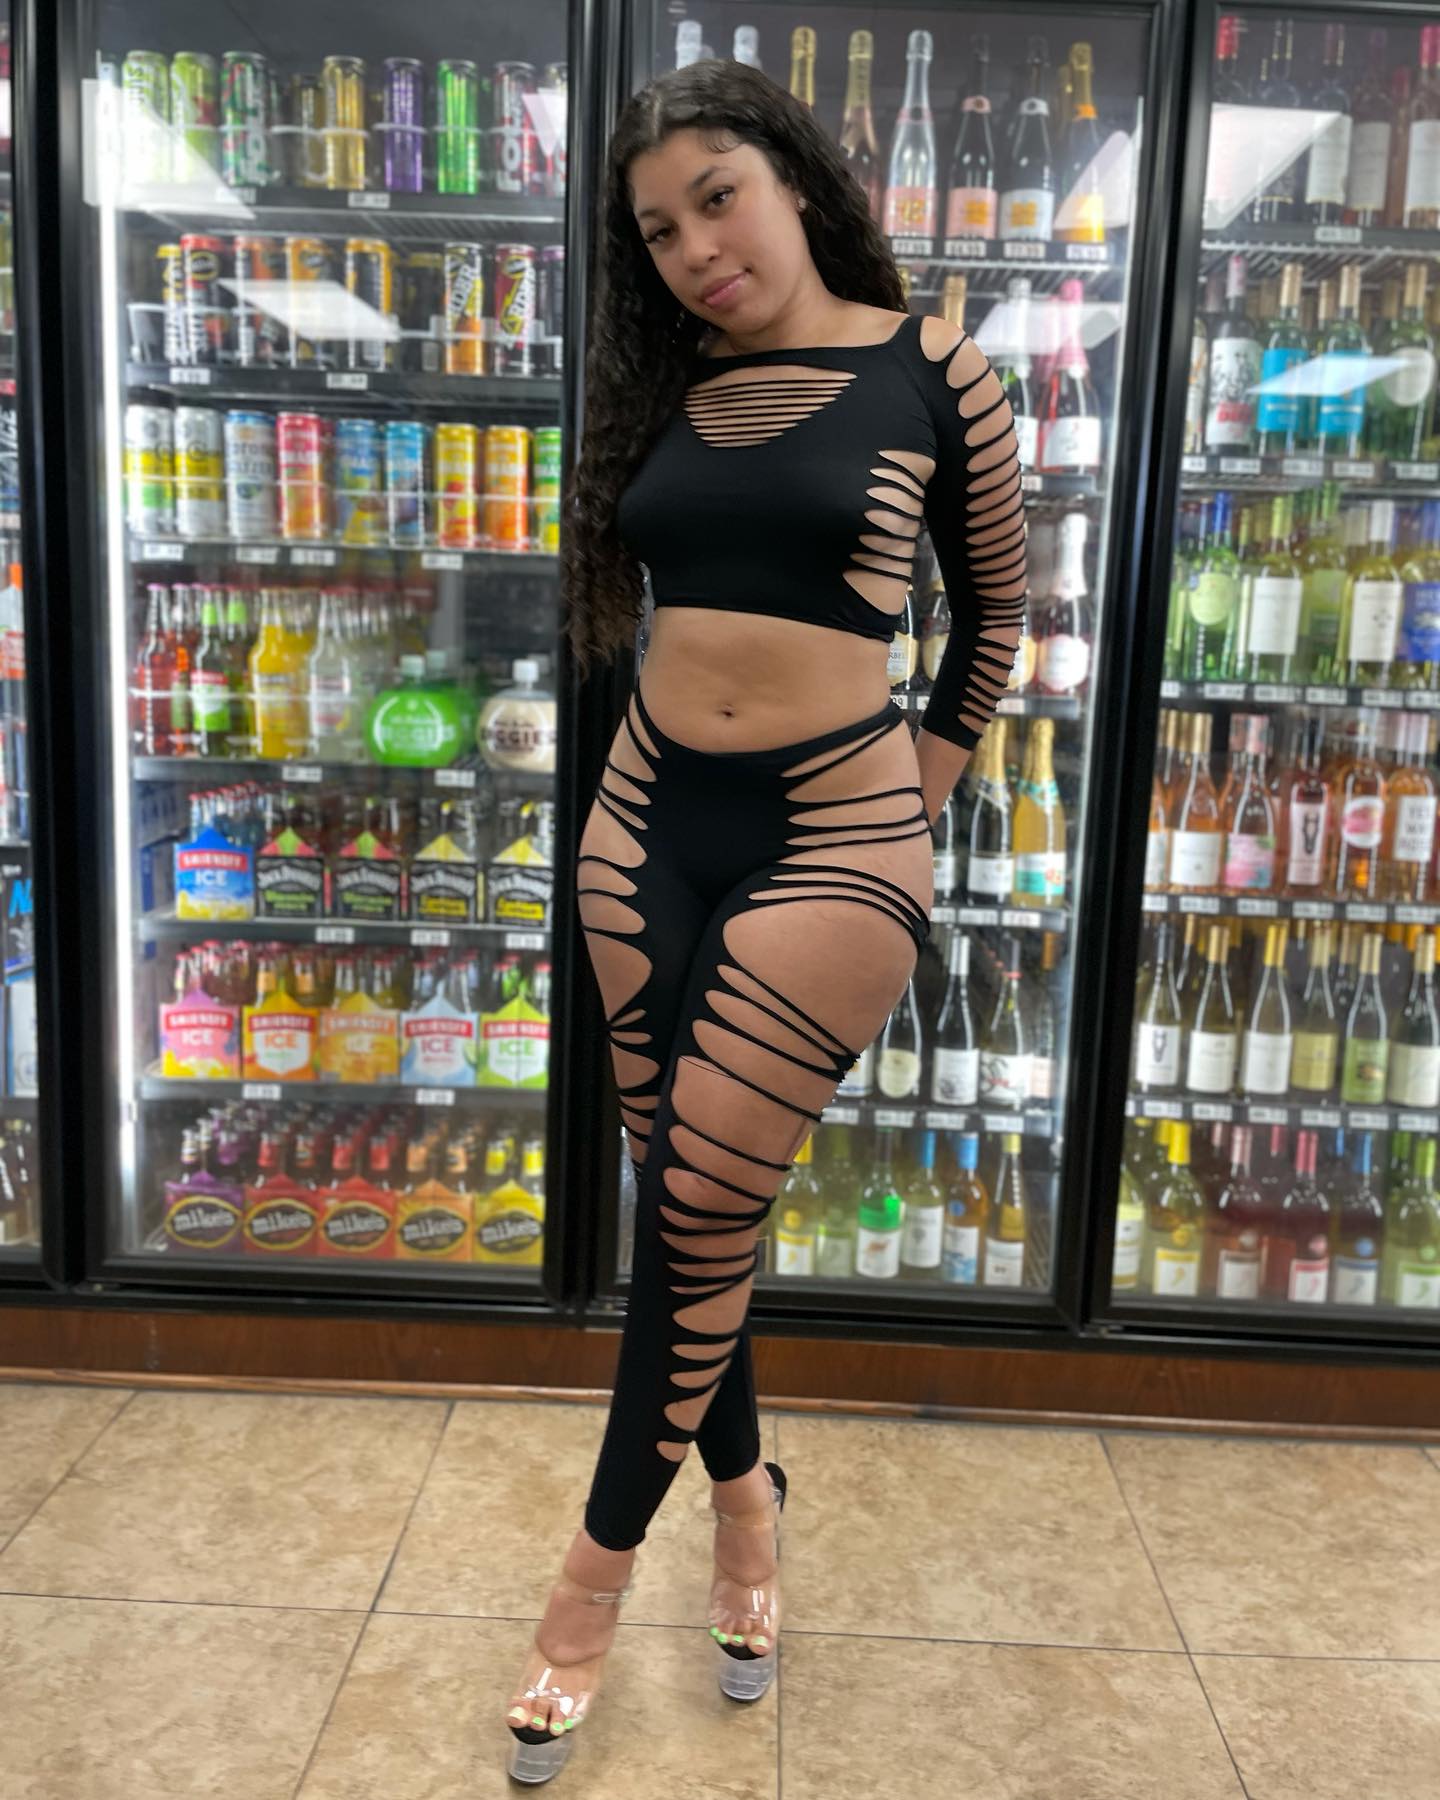 want a drink from the store babe ?